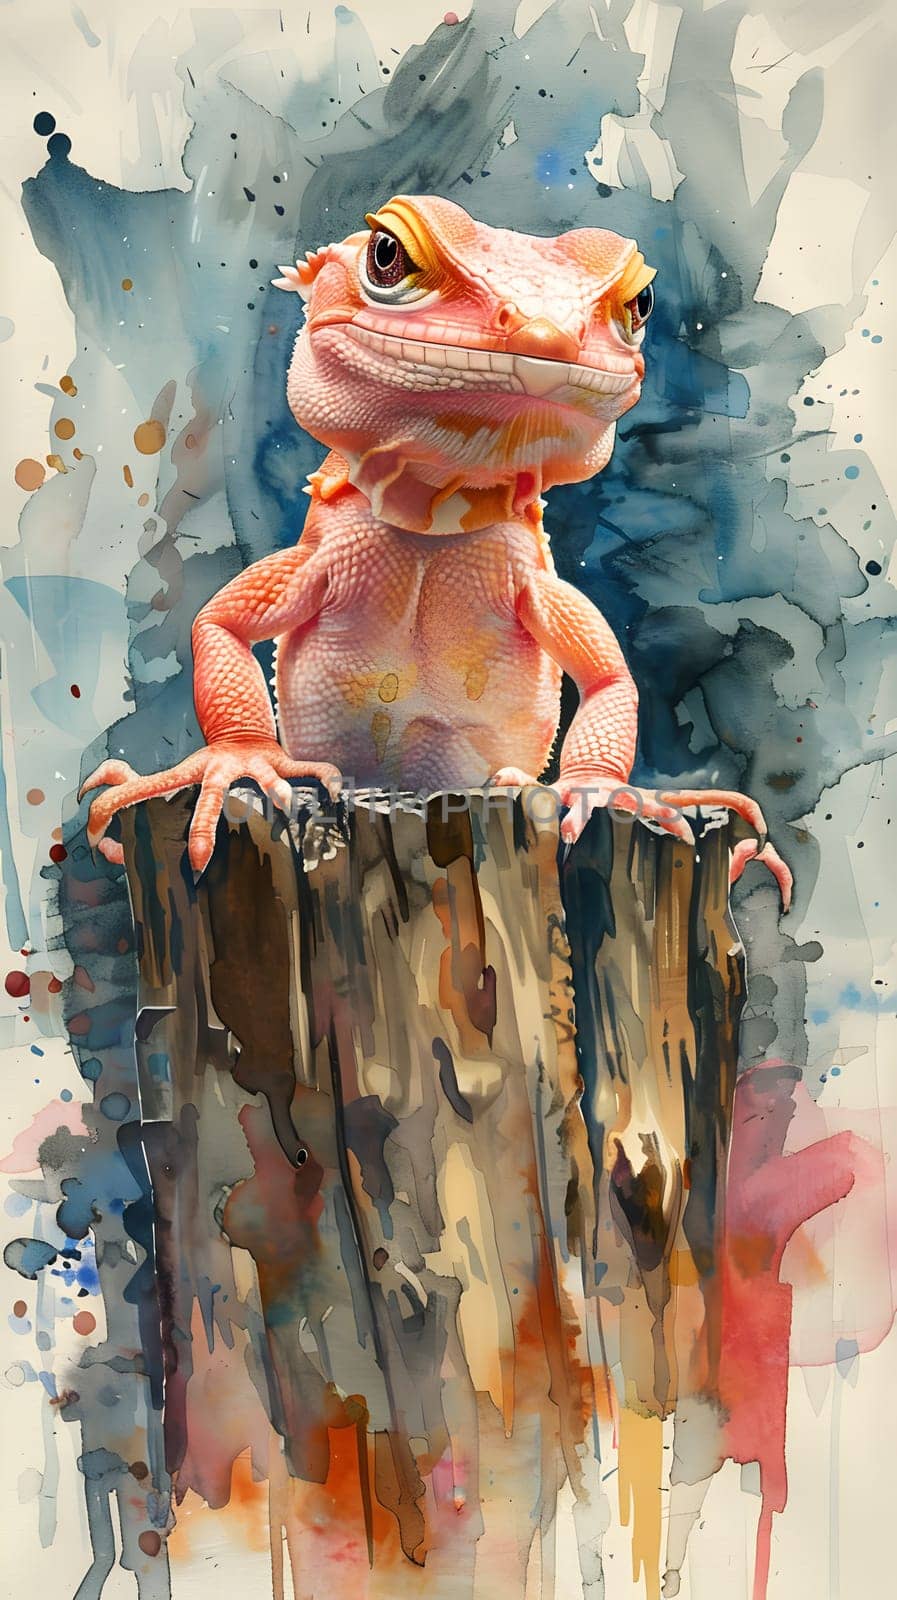 A lizard is perched on a wooden post in a watercolor painting, blending in with its surroundings like military camouflage. The artwork captures the amphibians tail in intricate detail